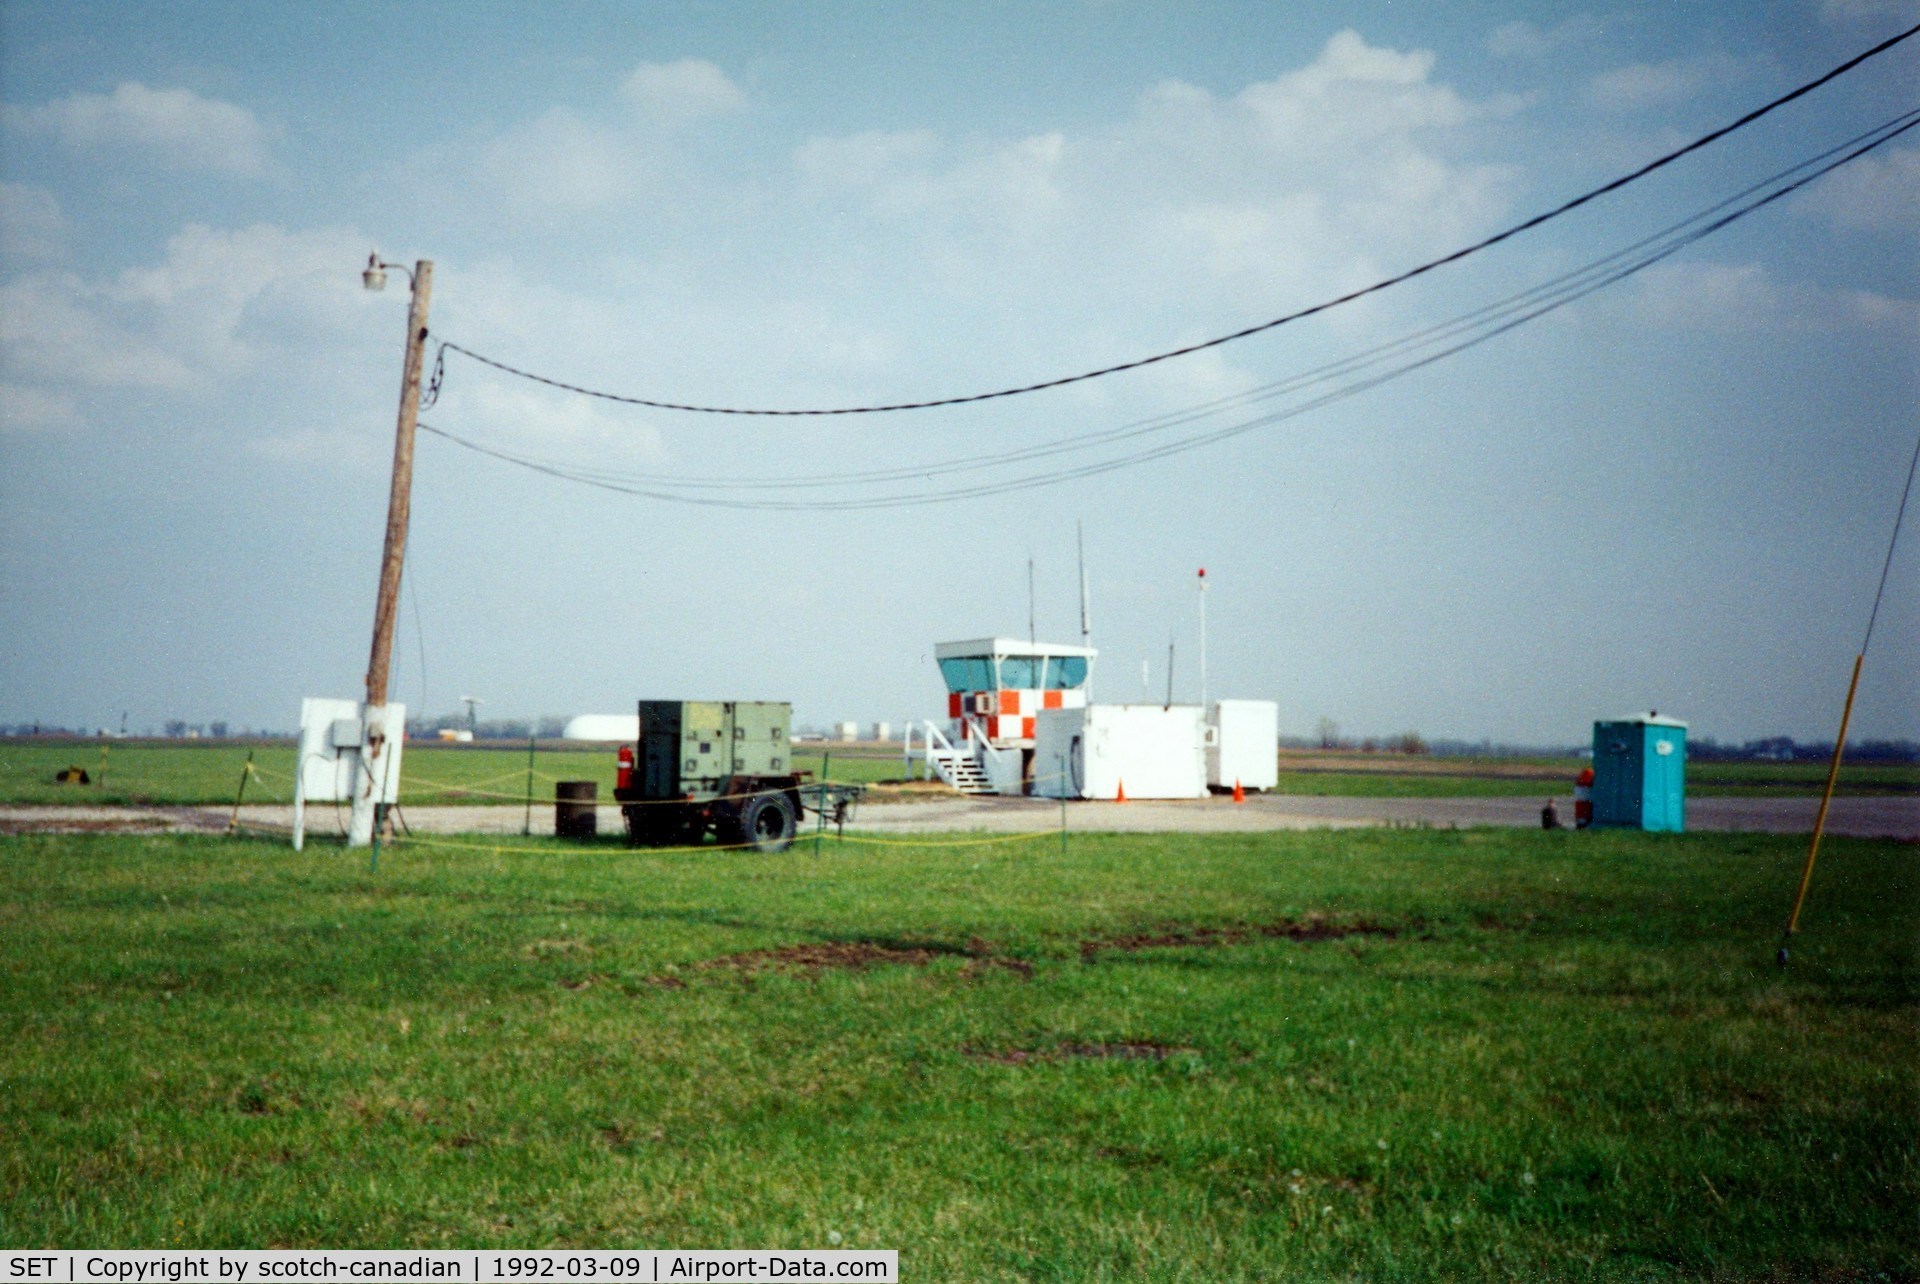 St Charles County Smartt Airport (SET) - Control Tower at St. Charles County Smartt Airport, St. Charles, MO. In 1992 this airfield's FAA identifier was 3SZ.